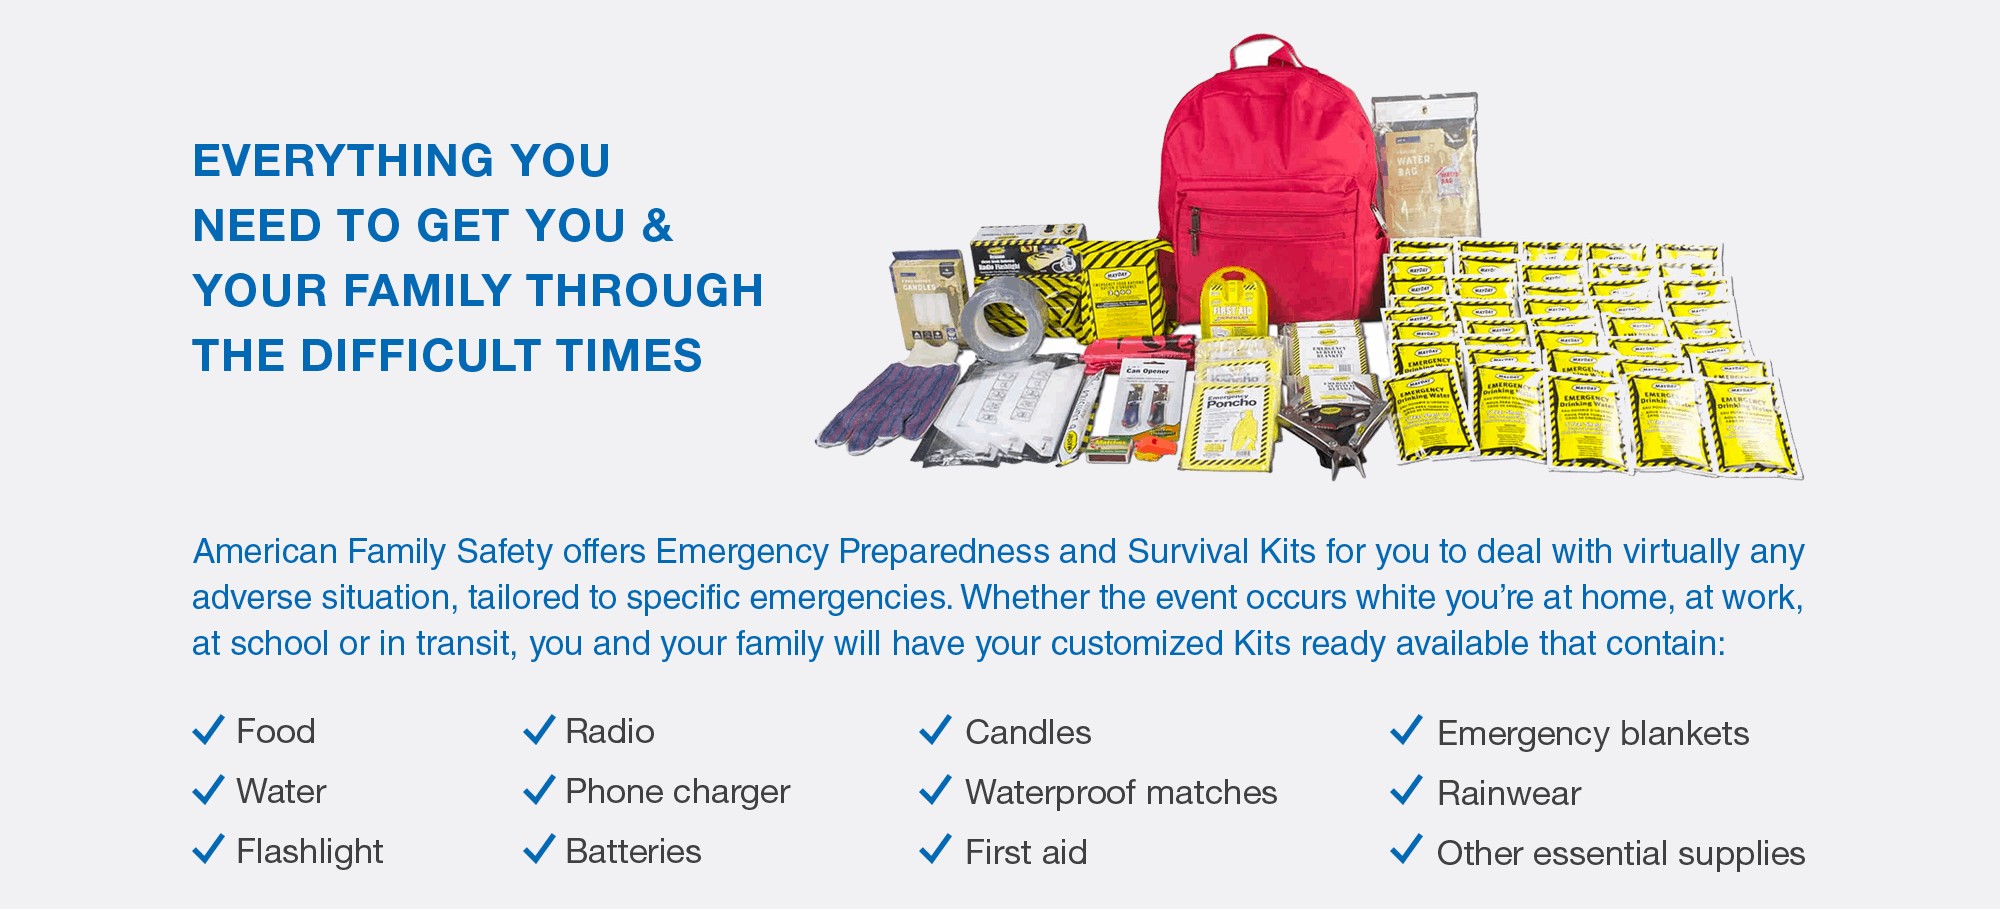 Prepared for the Coronavirus? American Family Safety is a leading provider of Emergency Kits